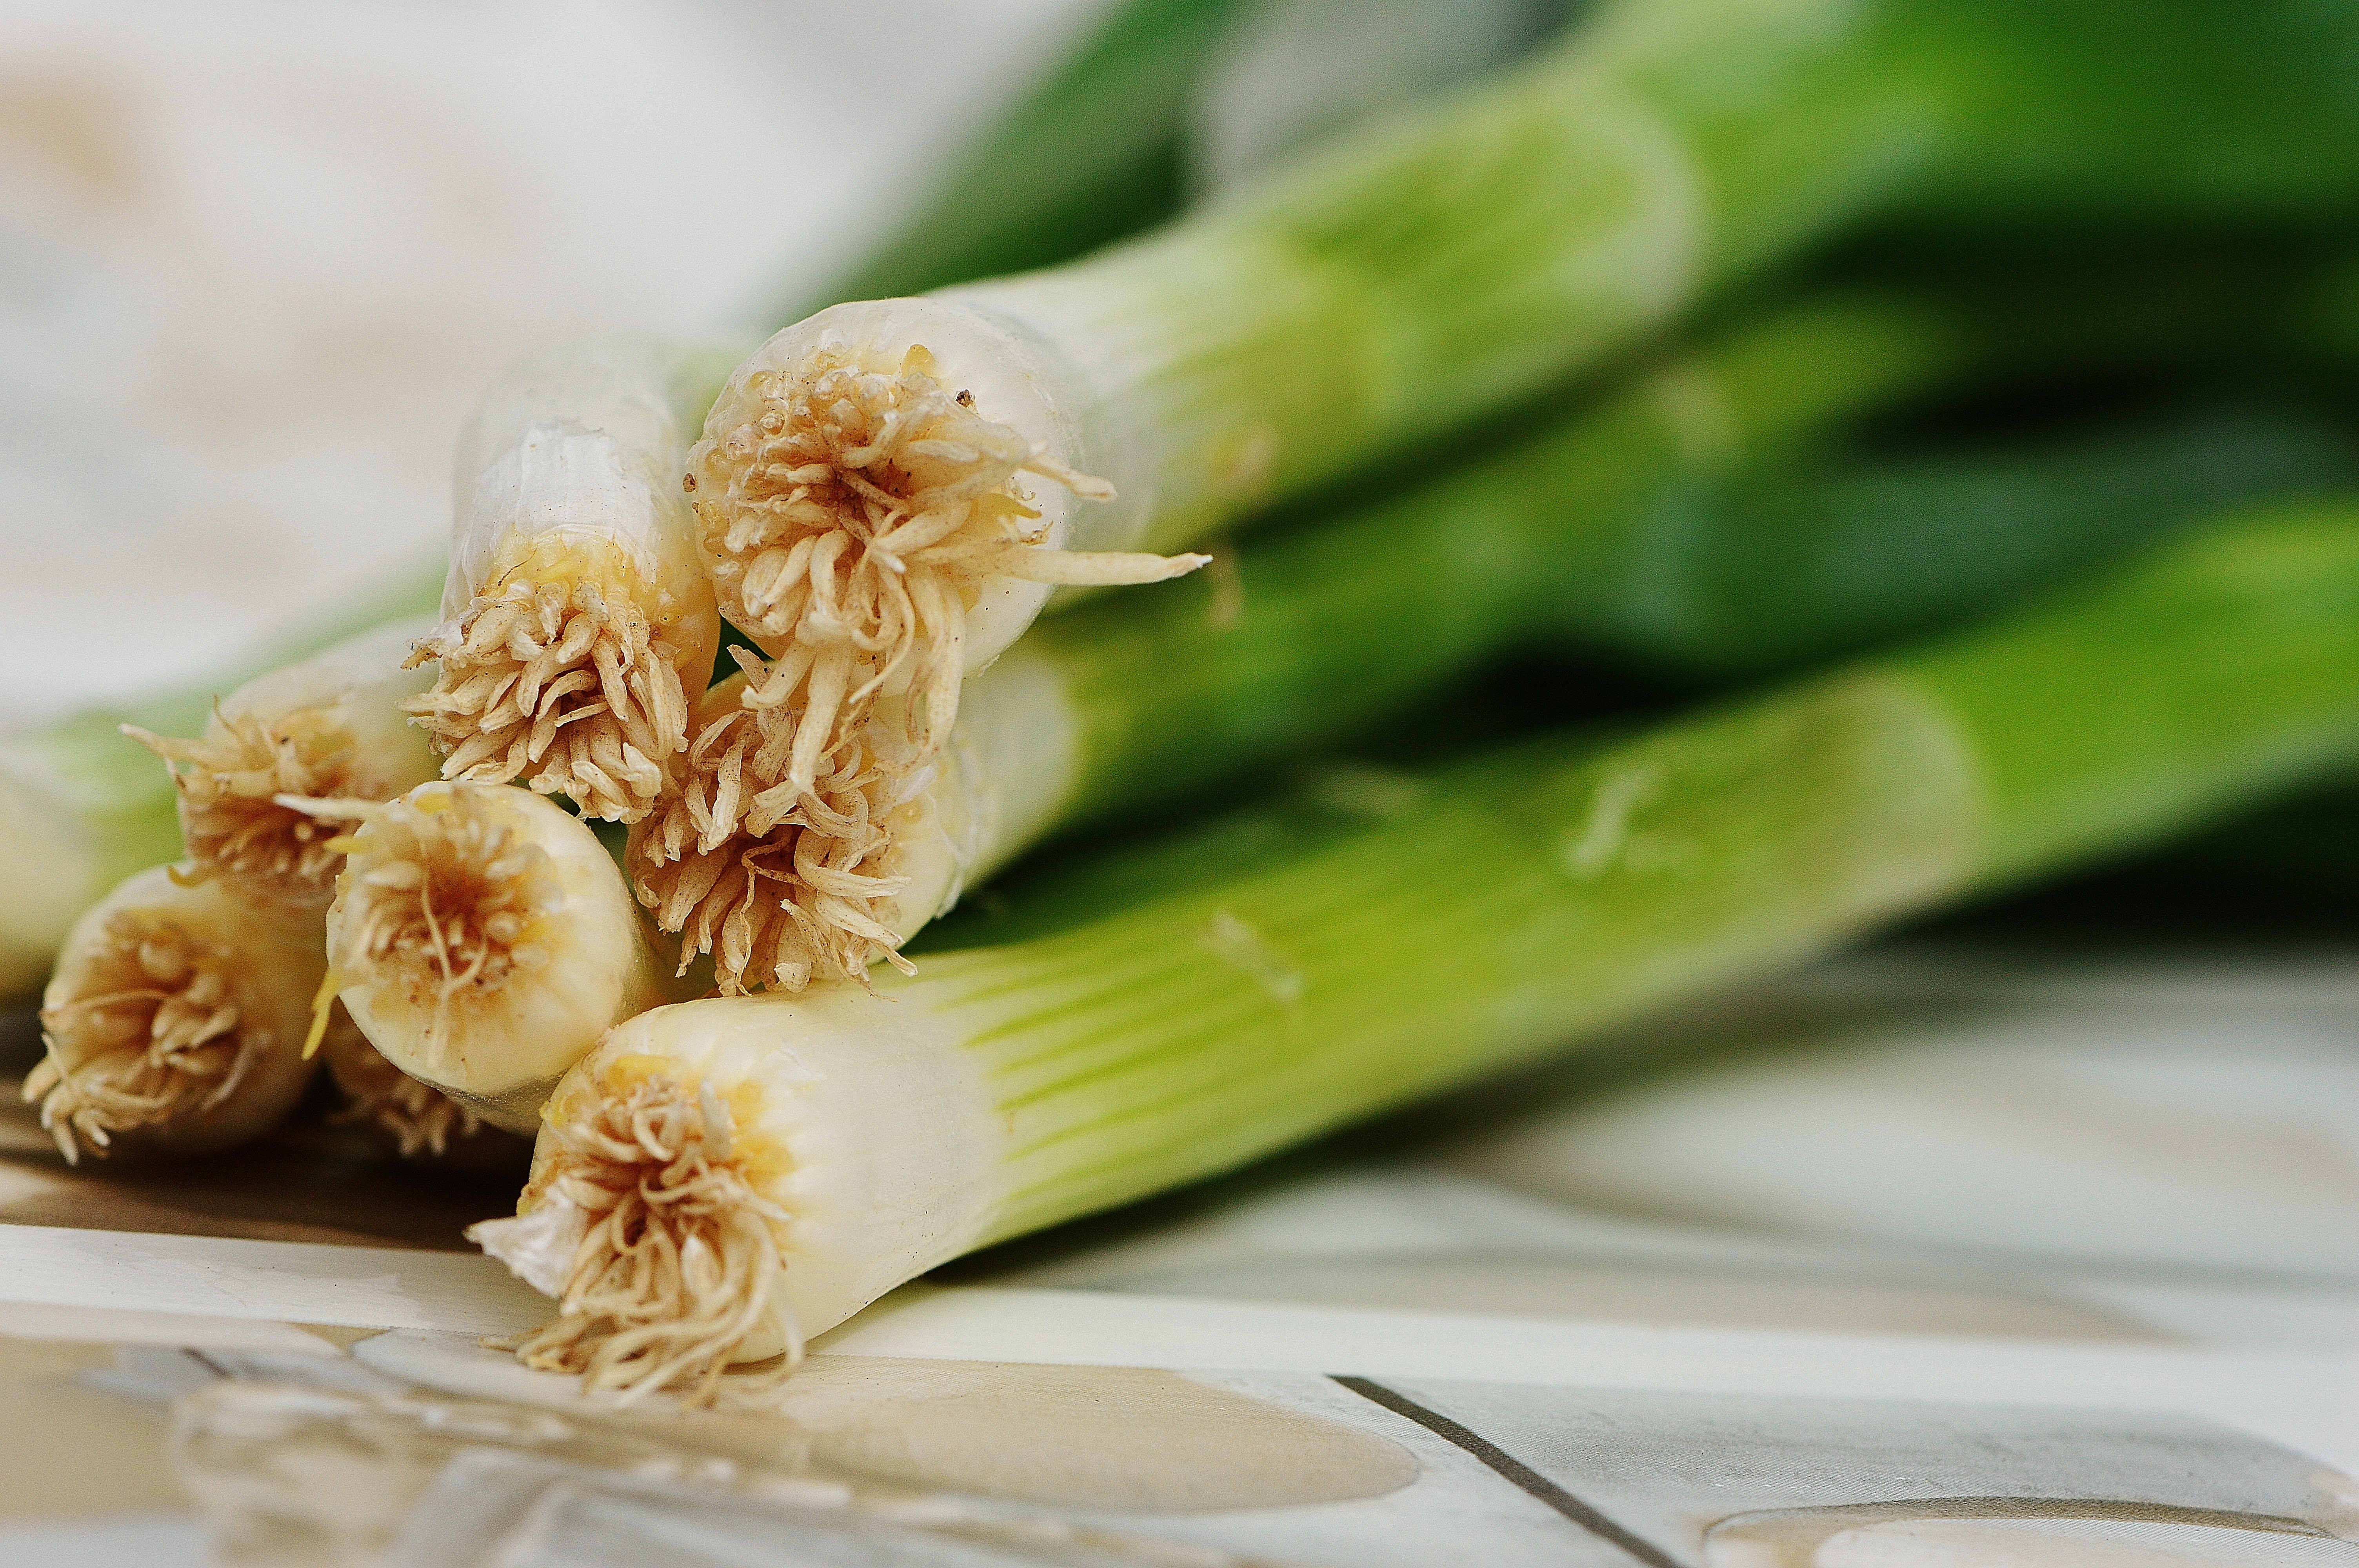 Spring Onions, Leek, Delicious, Food, food and drink, healthy eating